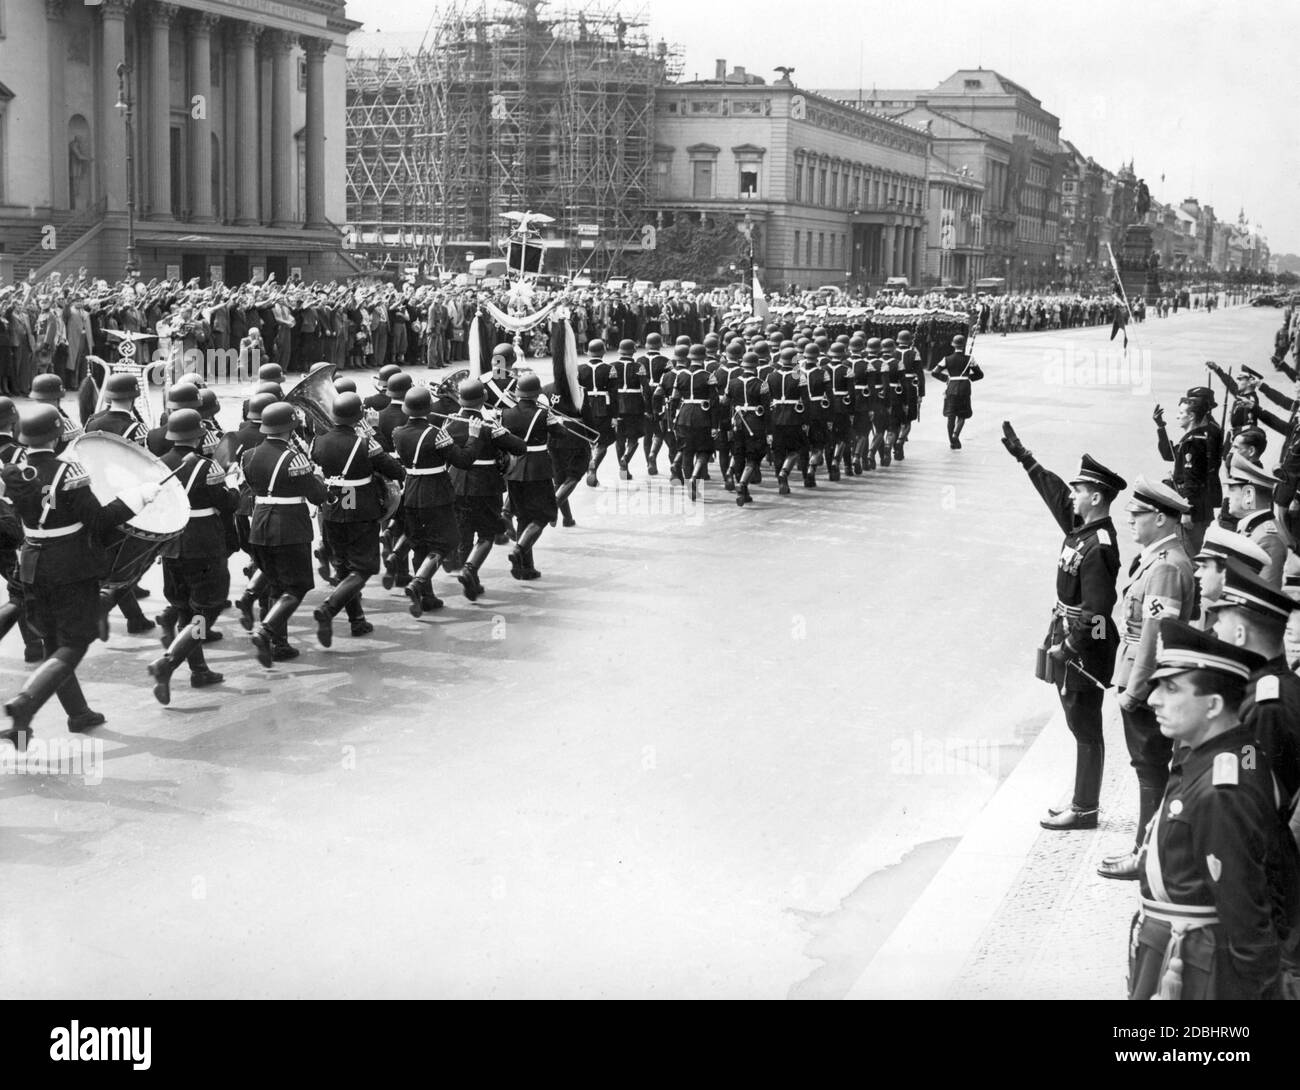 The honor guard of the Leibstandarte SS Adolf Hitler marches past the leader of the Italian Young Fascists (Gioventu Italiana del Littorio) Federale Sandro Bonamici (at the same time Gauleiter of Verona, right in the picture, performing the Nazi salute) and Chief of Staff Hartmann Lauterbacher (half right behind him). The occasion was a wreath-laying ceremony at the memorial (Neue Wache) in Berlin Unter den Linden on August 19, 1939 by the participants of the long-distance bicycle tour Rome-Berlin-Rome. In the background (from left to right) the State Opera, the Old Library (in  scaffolding), Stock Photo